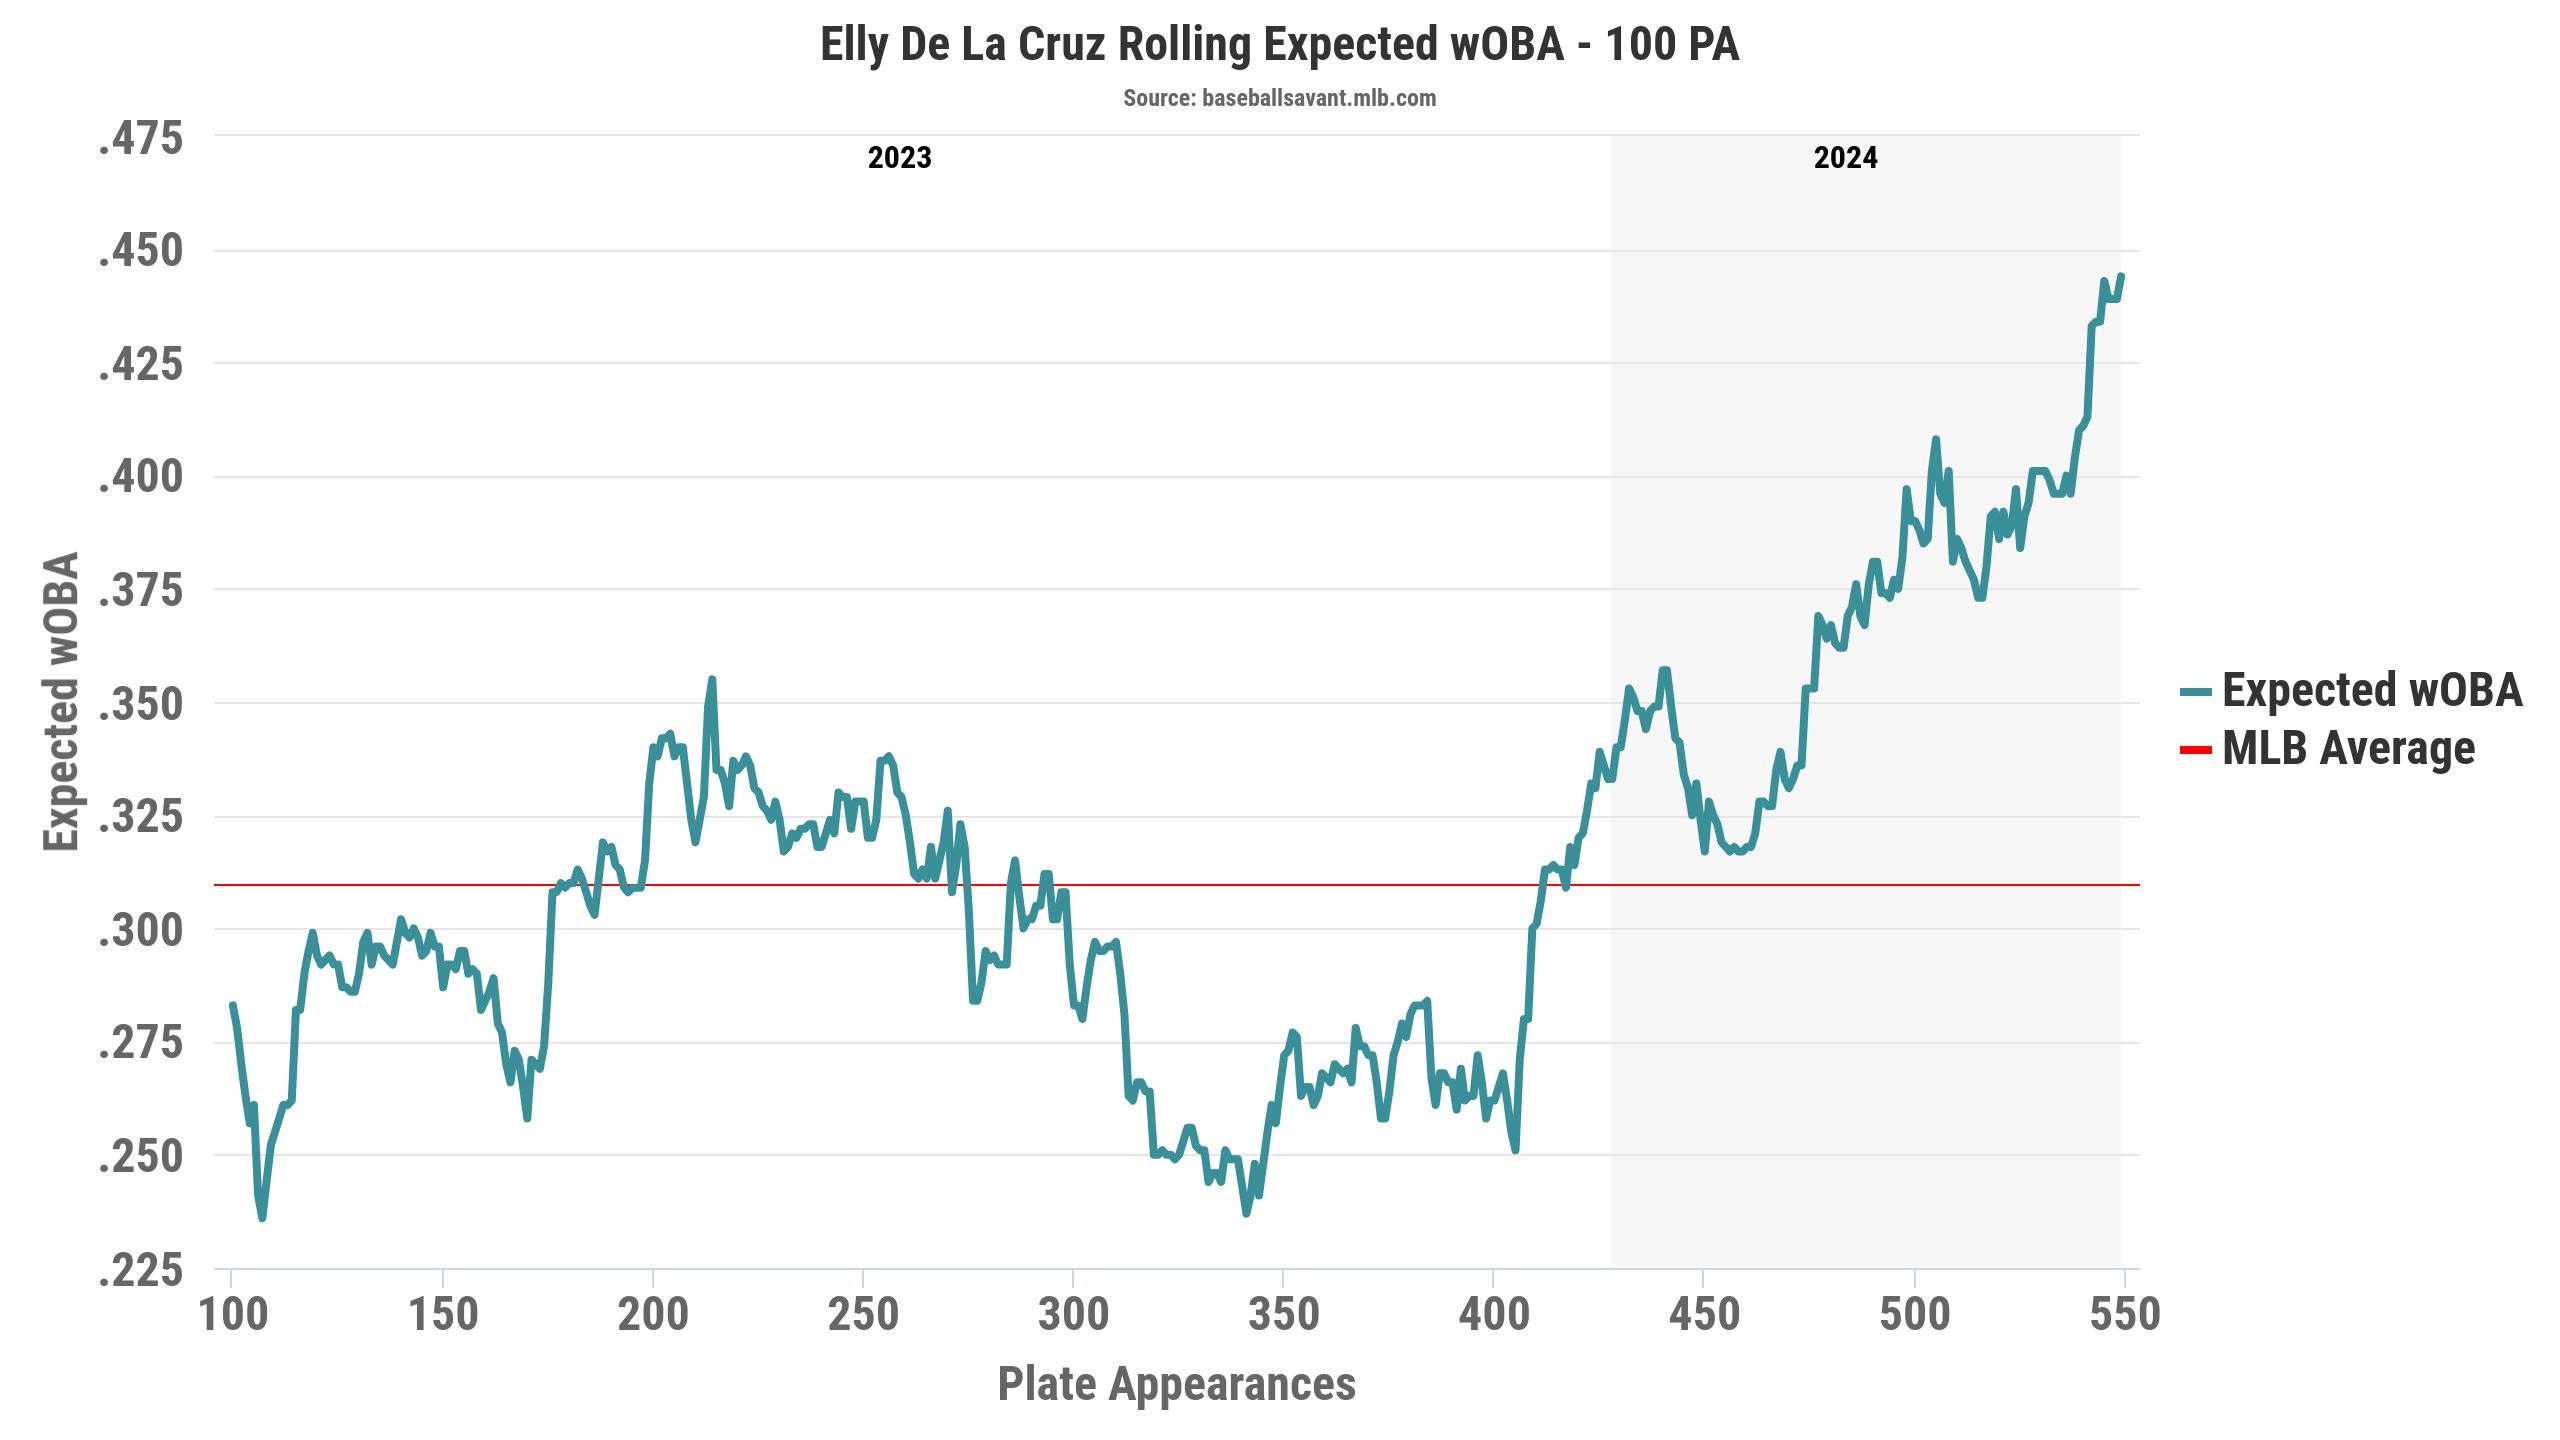 De La Cruz's rolling xwOBA average per 100 plate appearances. Each point on the graph shows De La Cruz's xwOBA over his previous 100 PAs up to that point. He maxed out at .355 as during his rookie season.